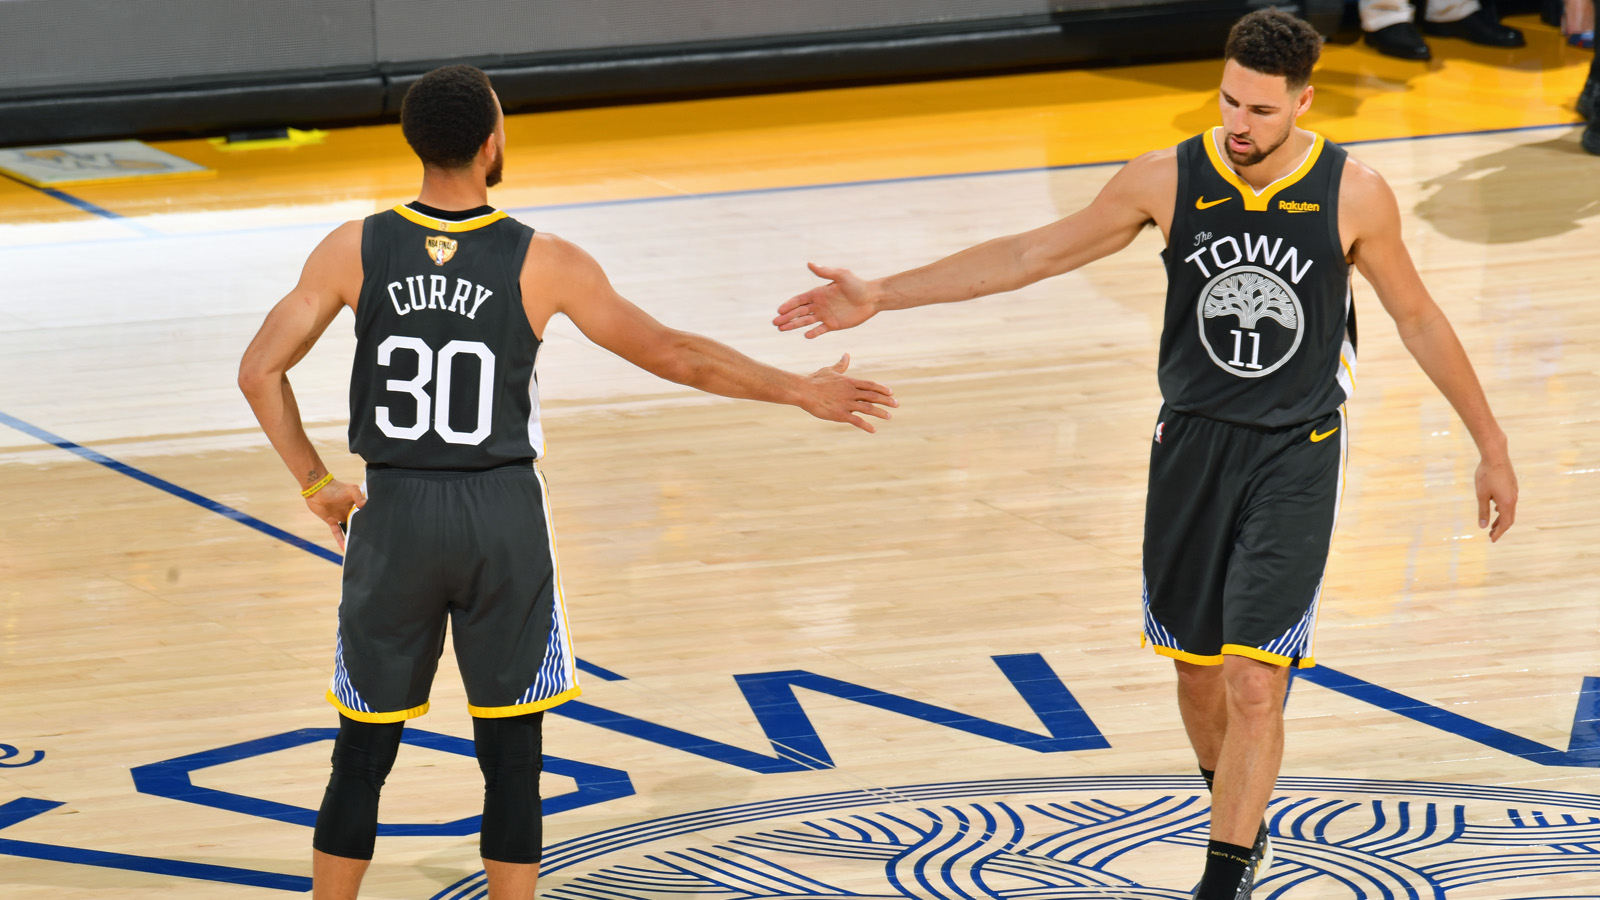 Klay Thompson Steph Curry Scrimmage Footage Reminds Of What's To Come